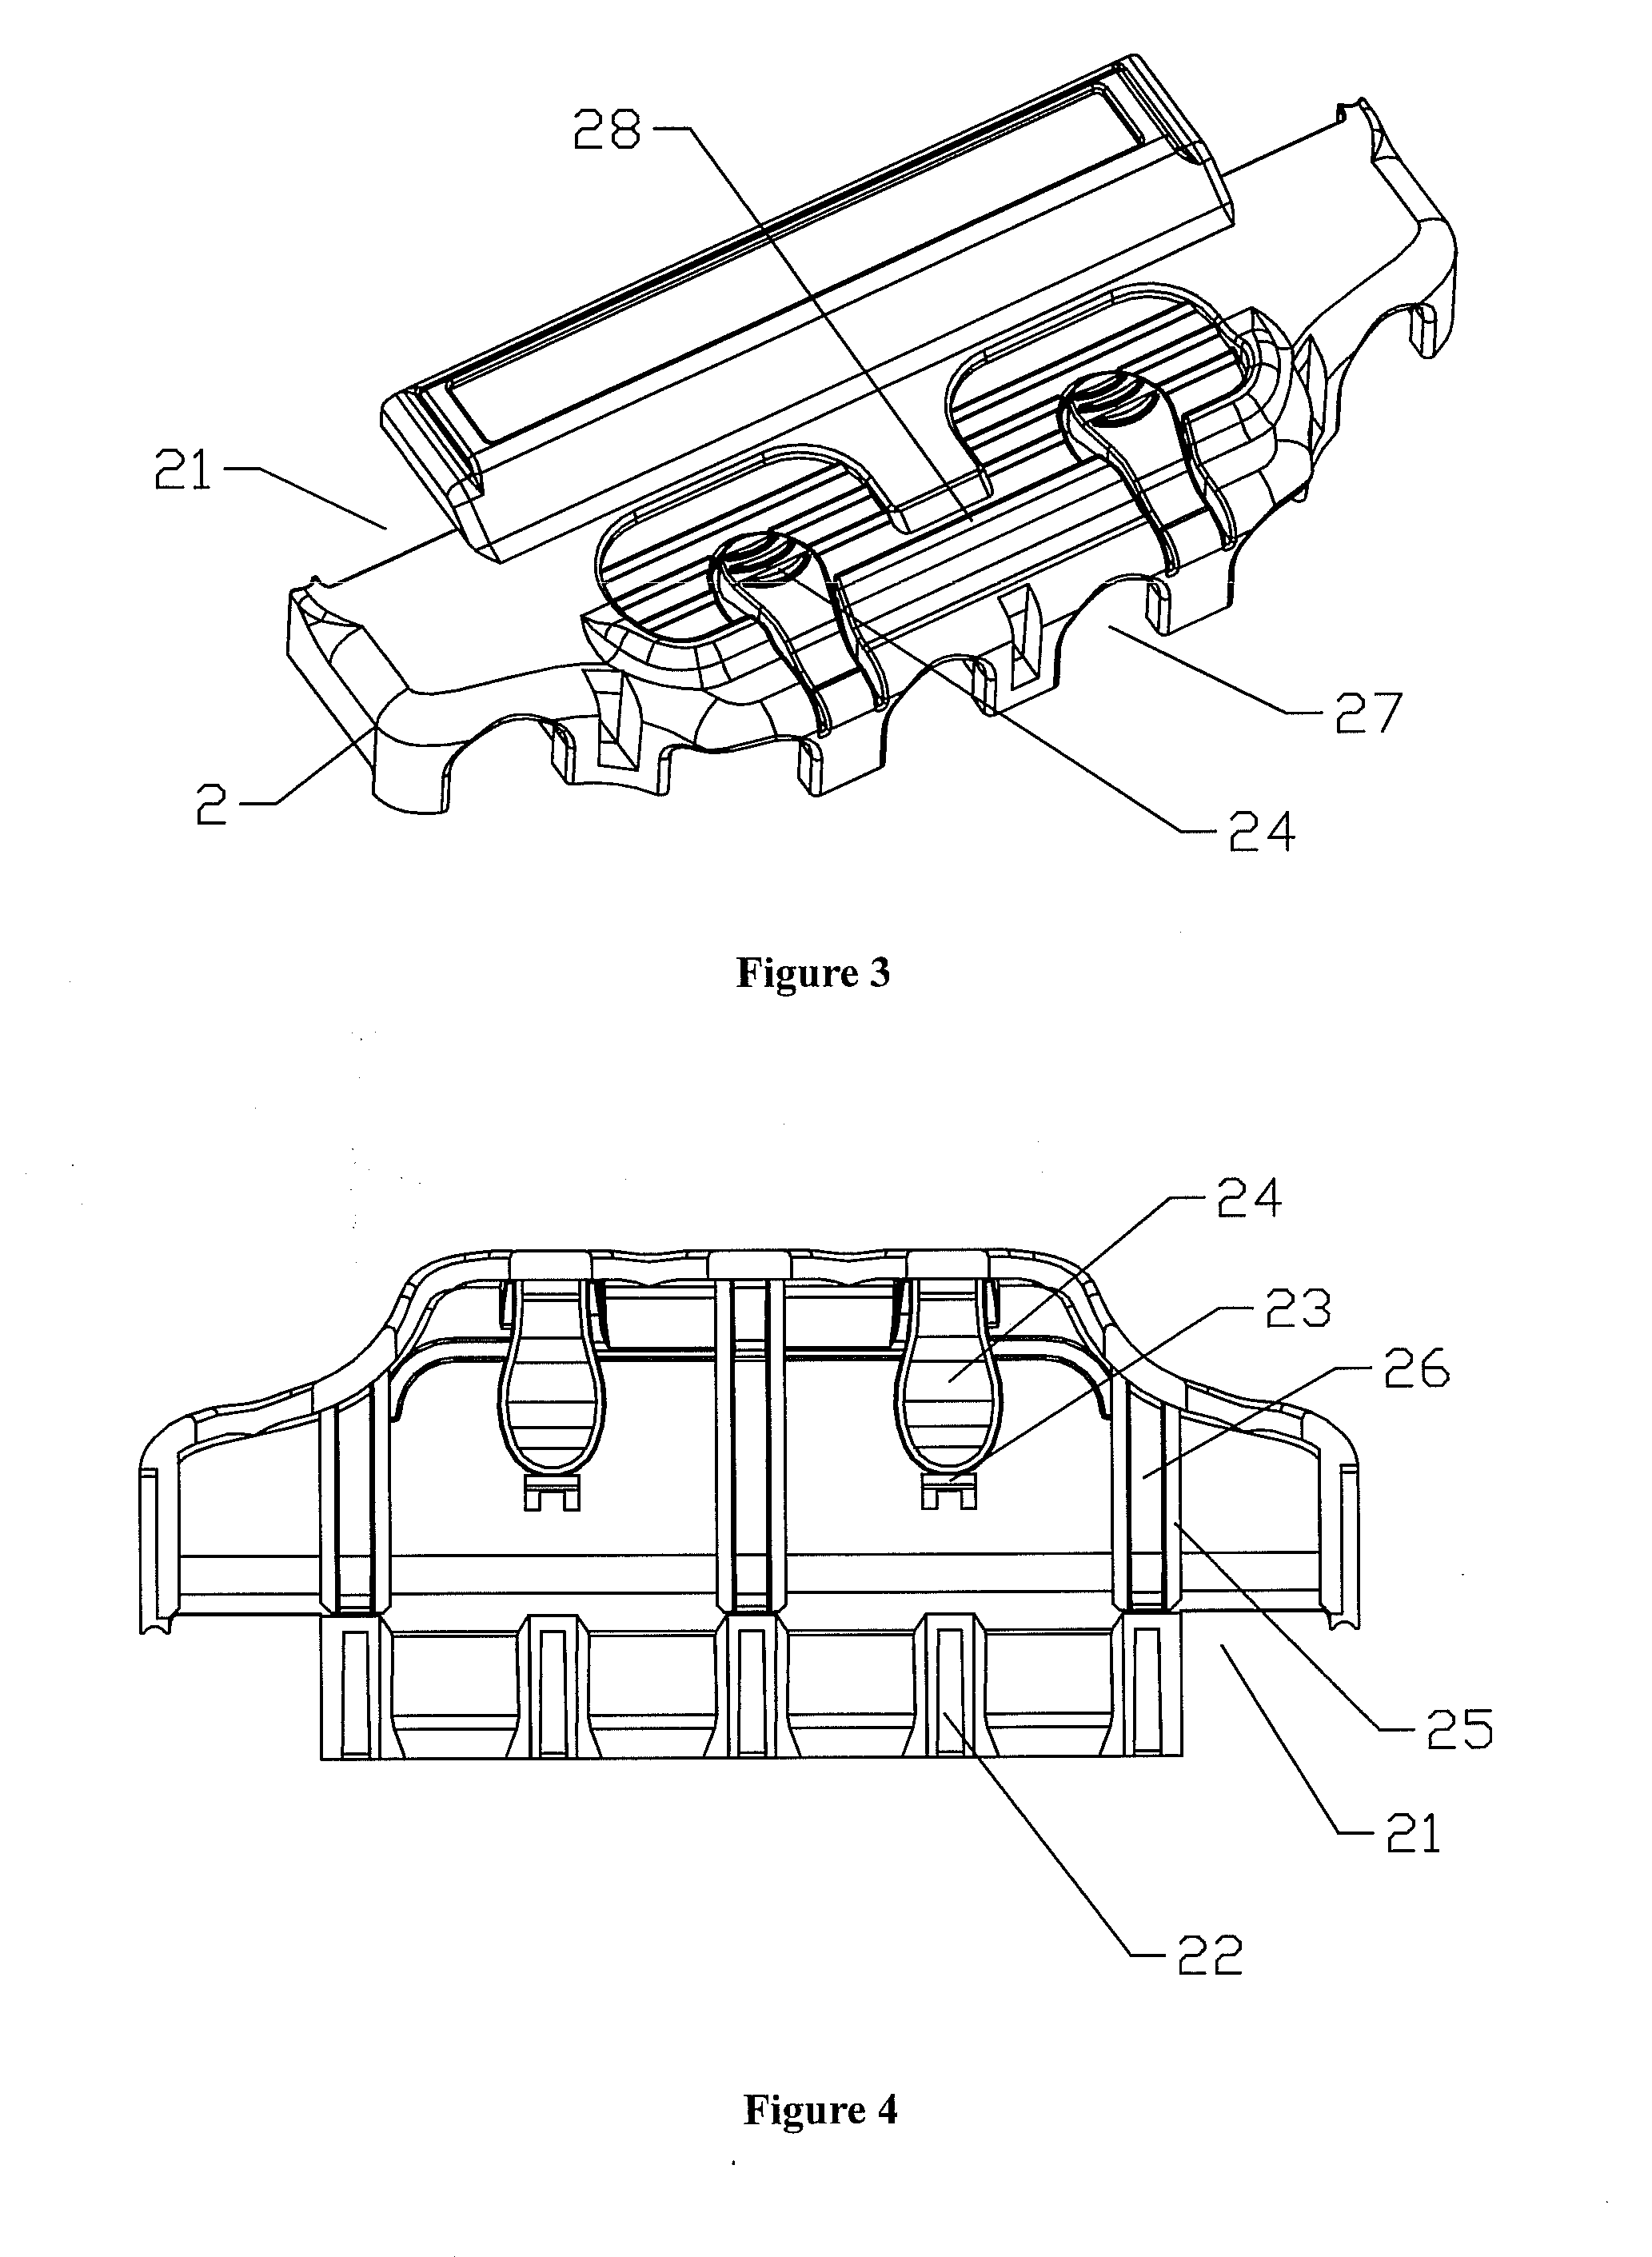 Switch Pack Assembly for Cable Clusters of Network Switches and the Special Release Tool Assembly Thereof